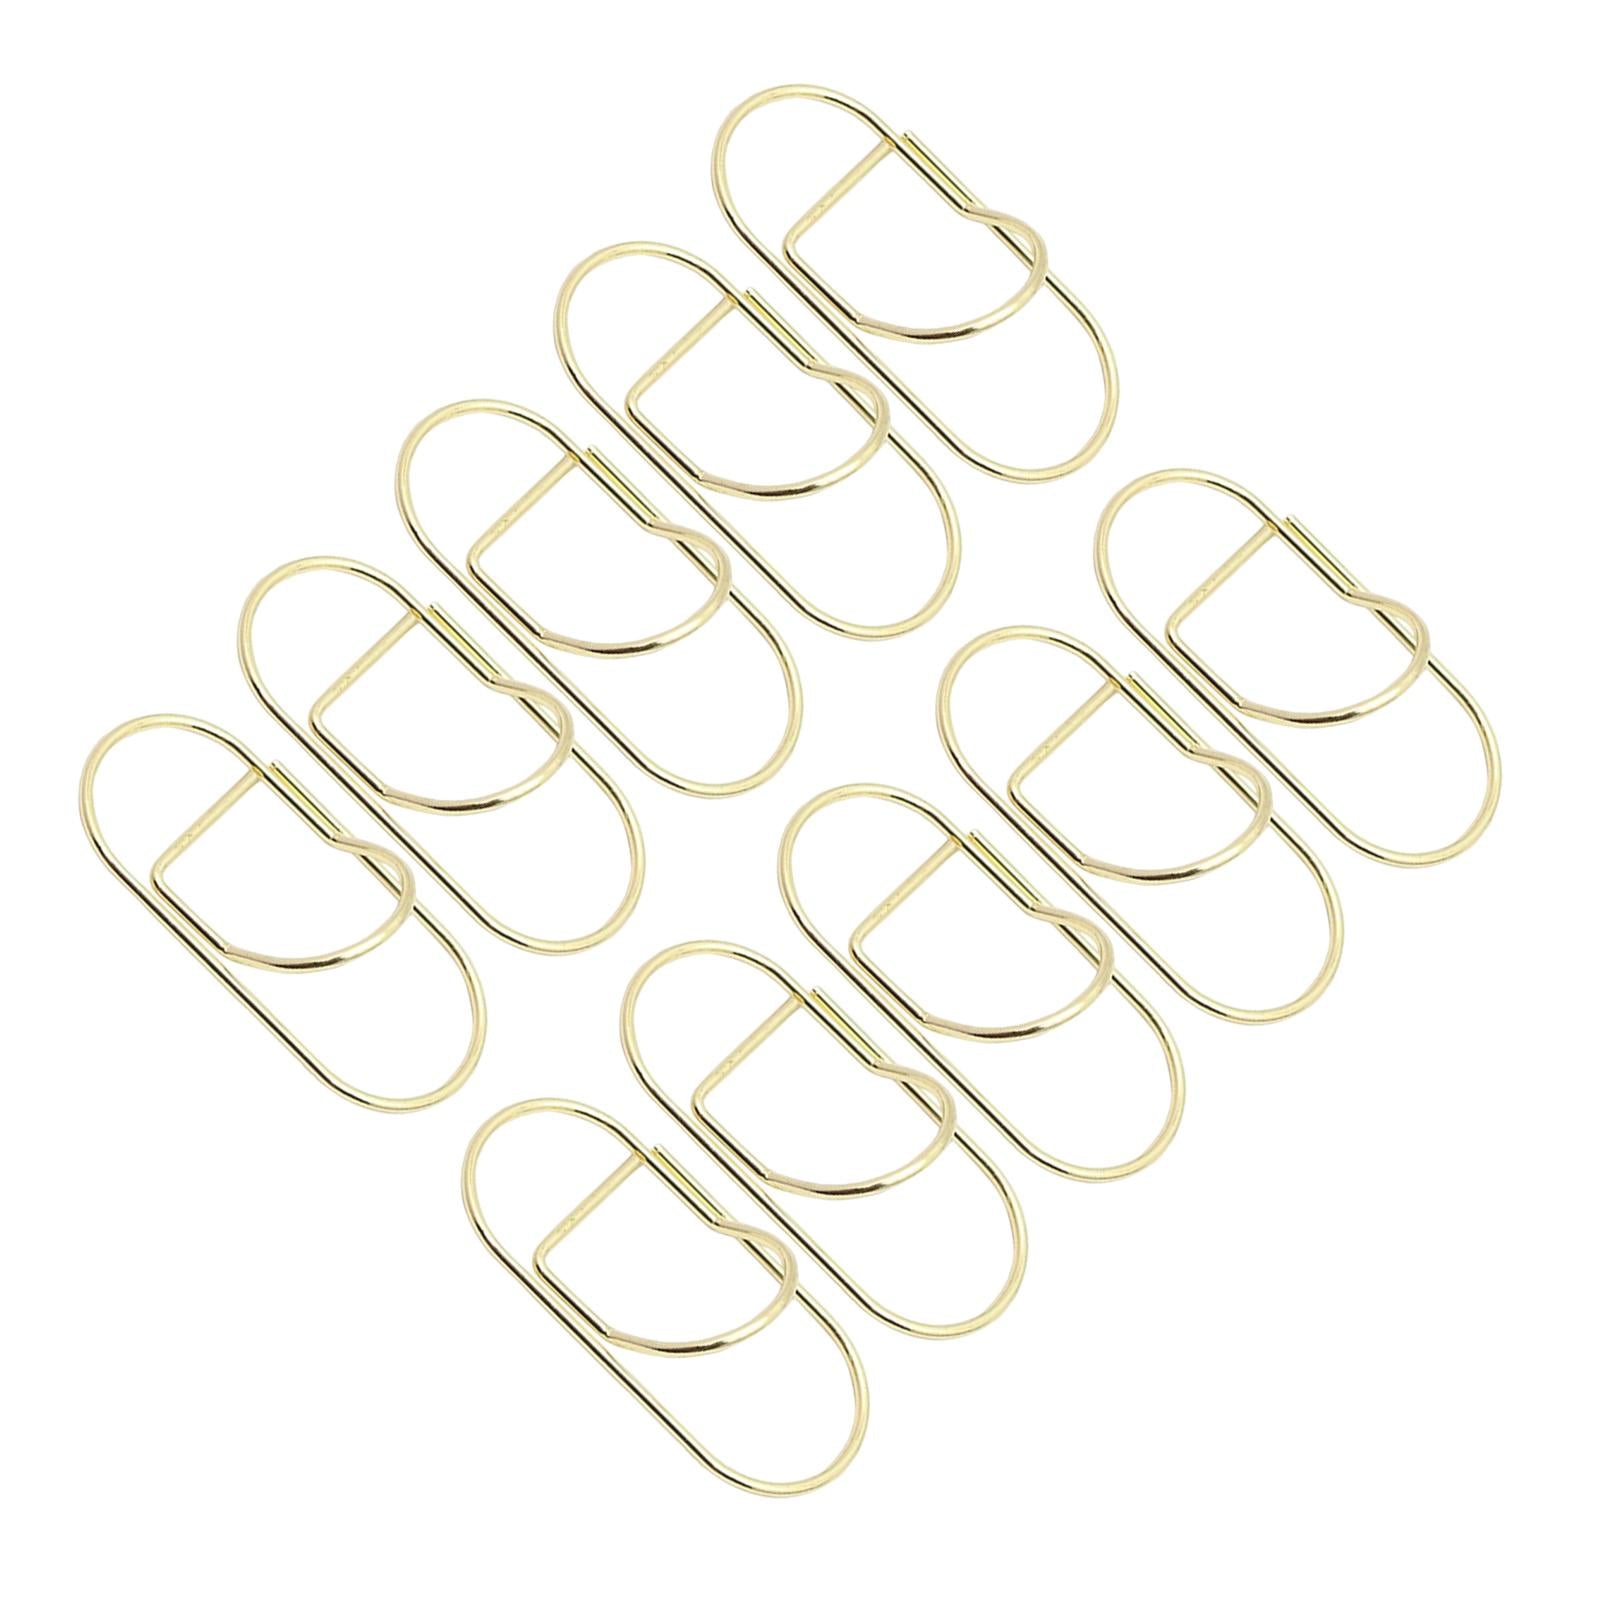 10x Paper Clips Metal Pen holder Portable for Graduation Birthday 23mmx60mm